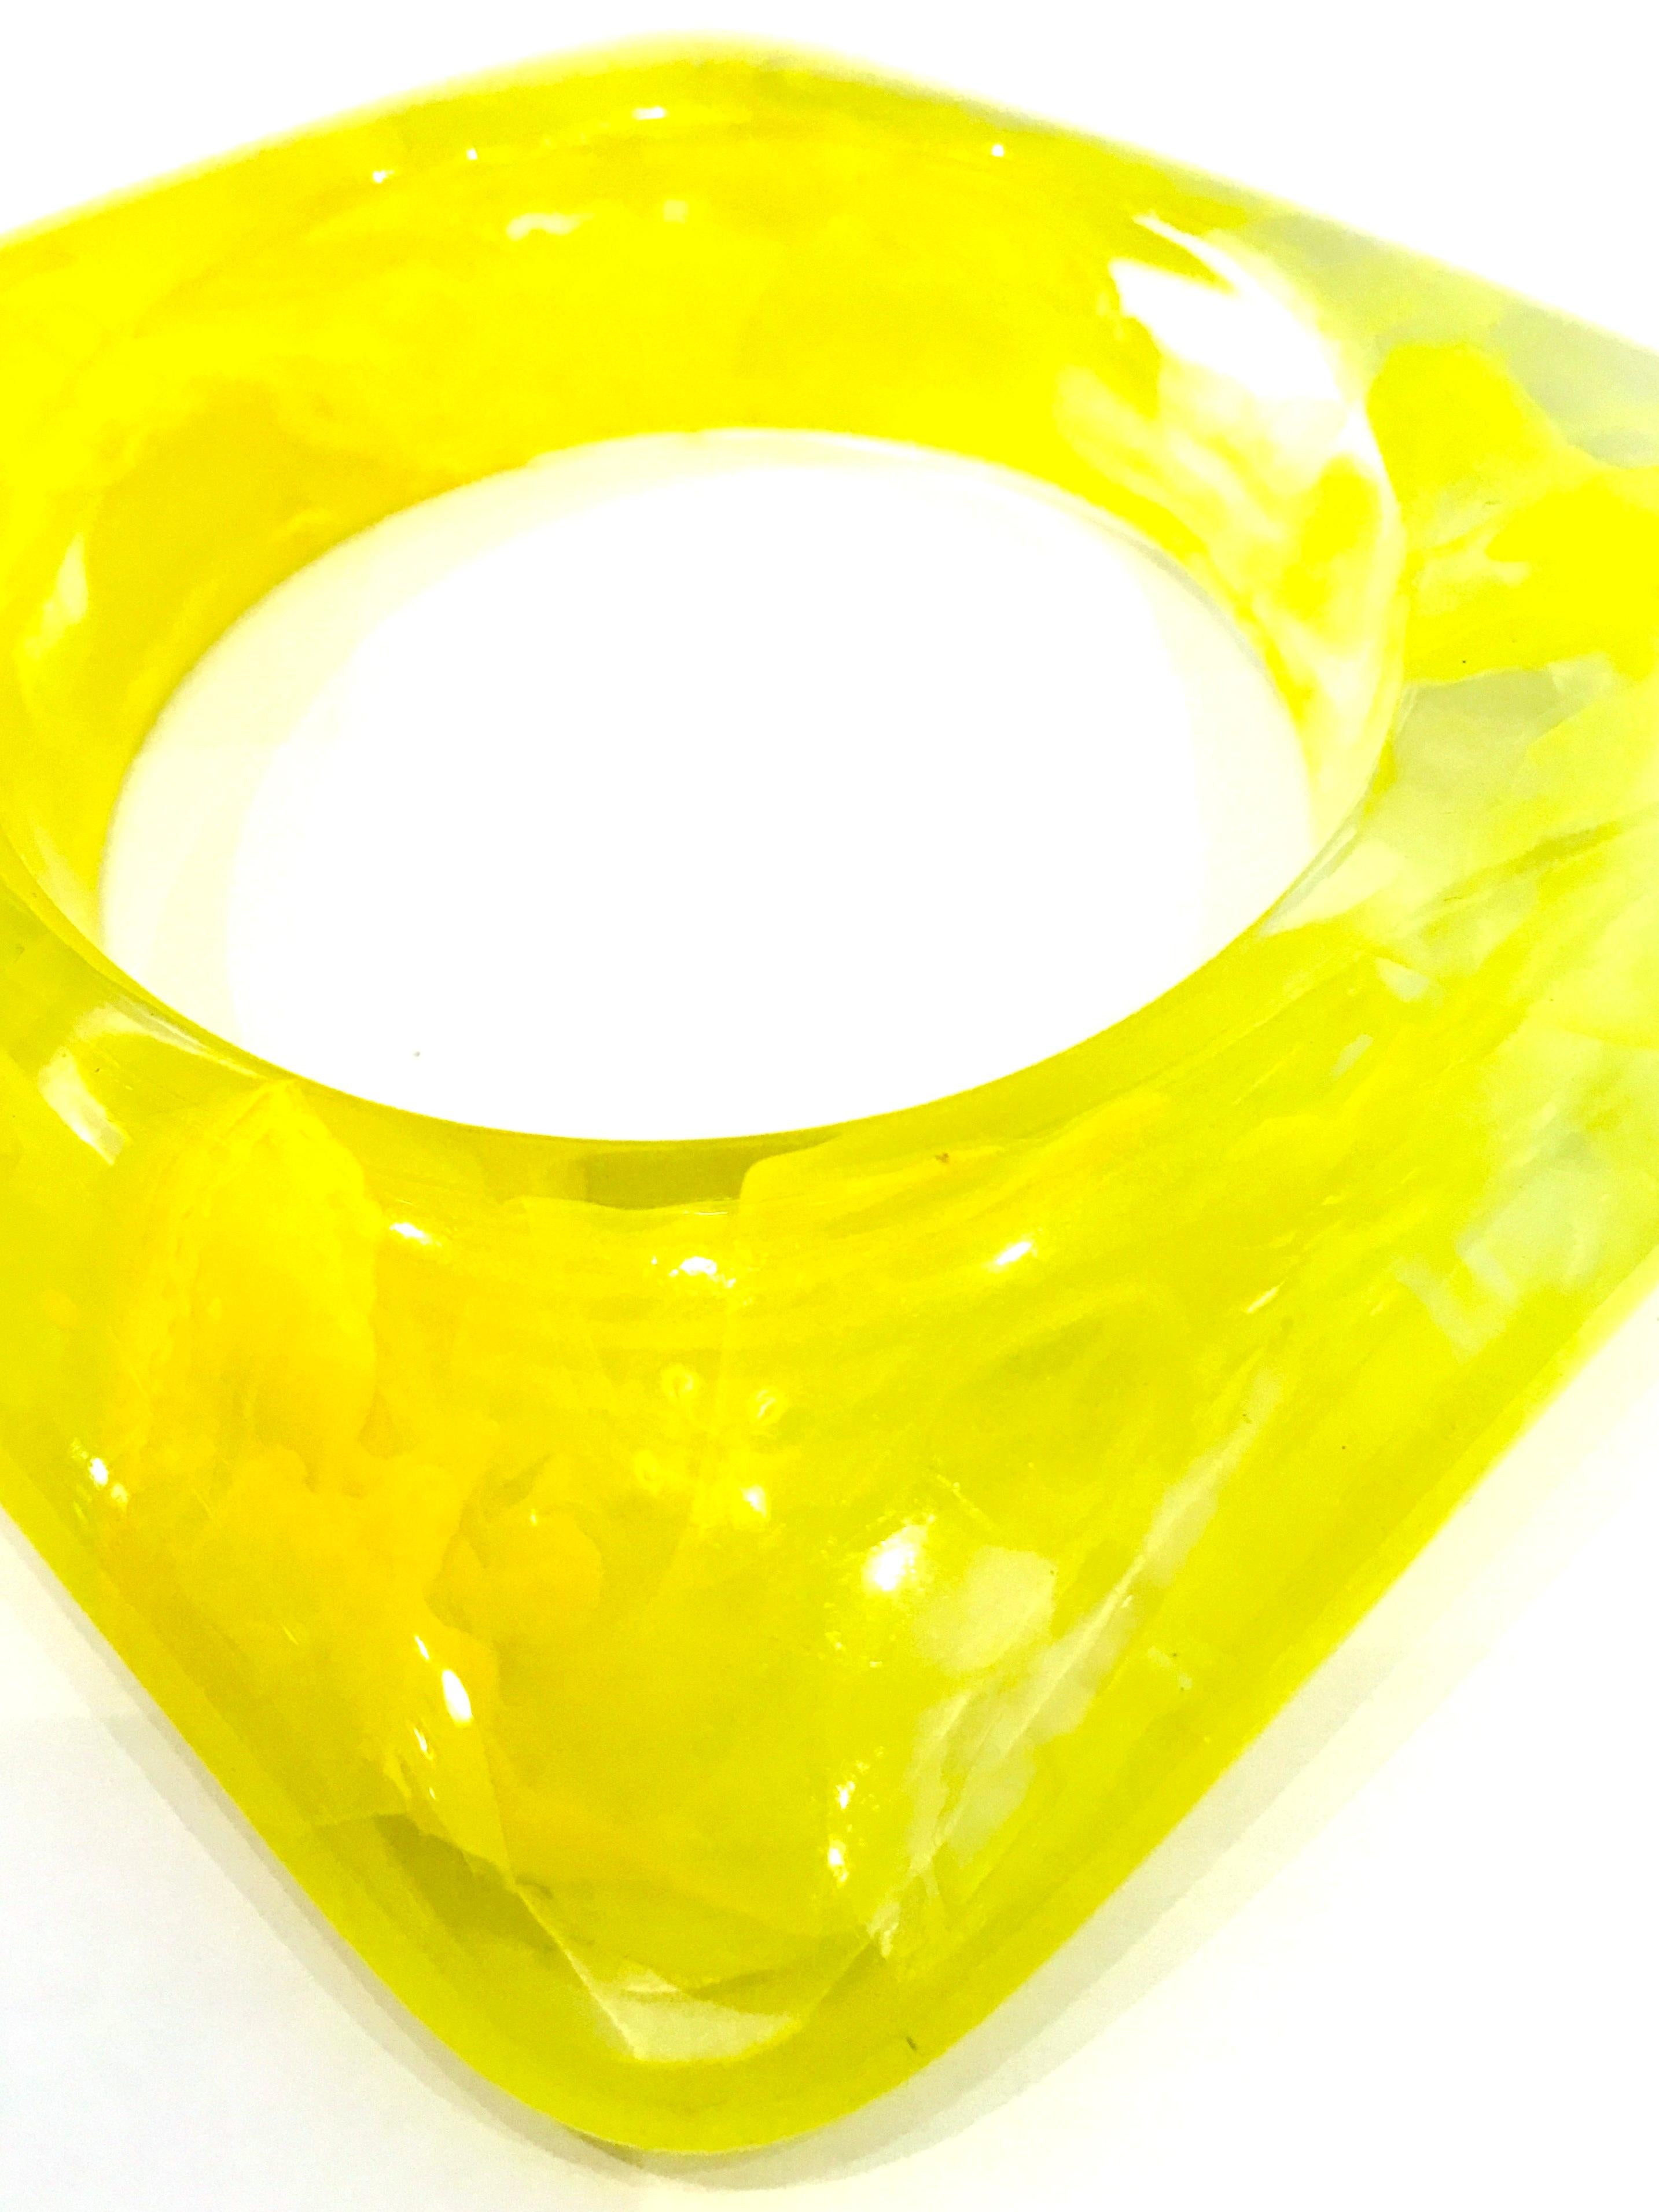 Lucite Organic Form Circle In A Square Bangle Bracelet For Sale 2